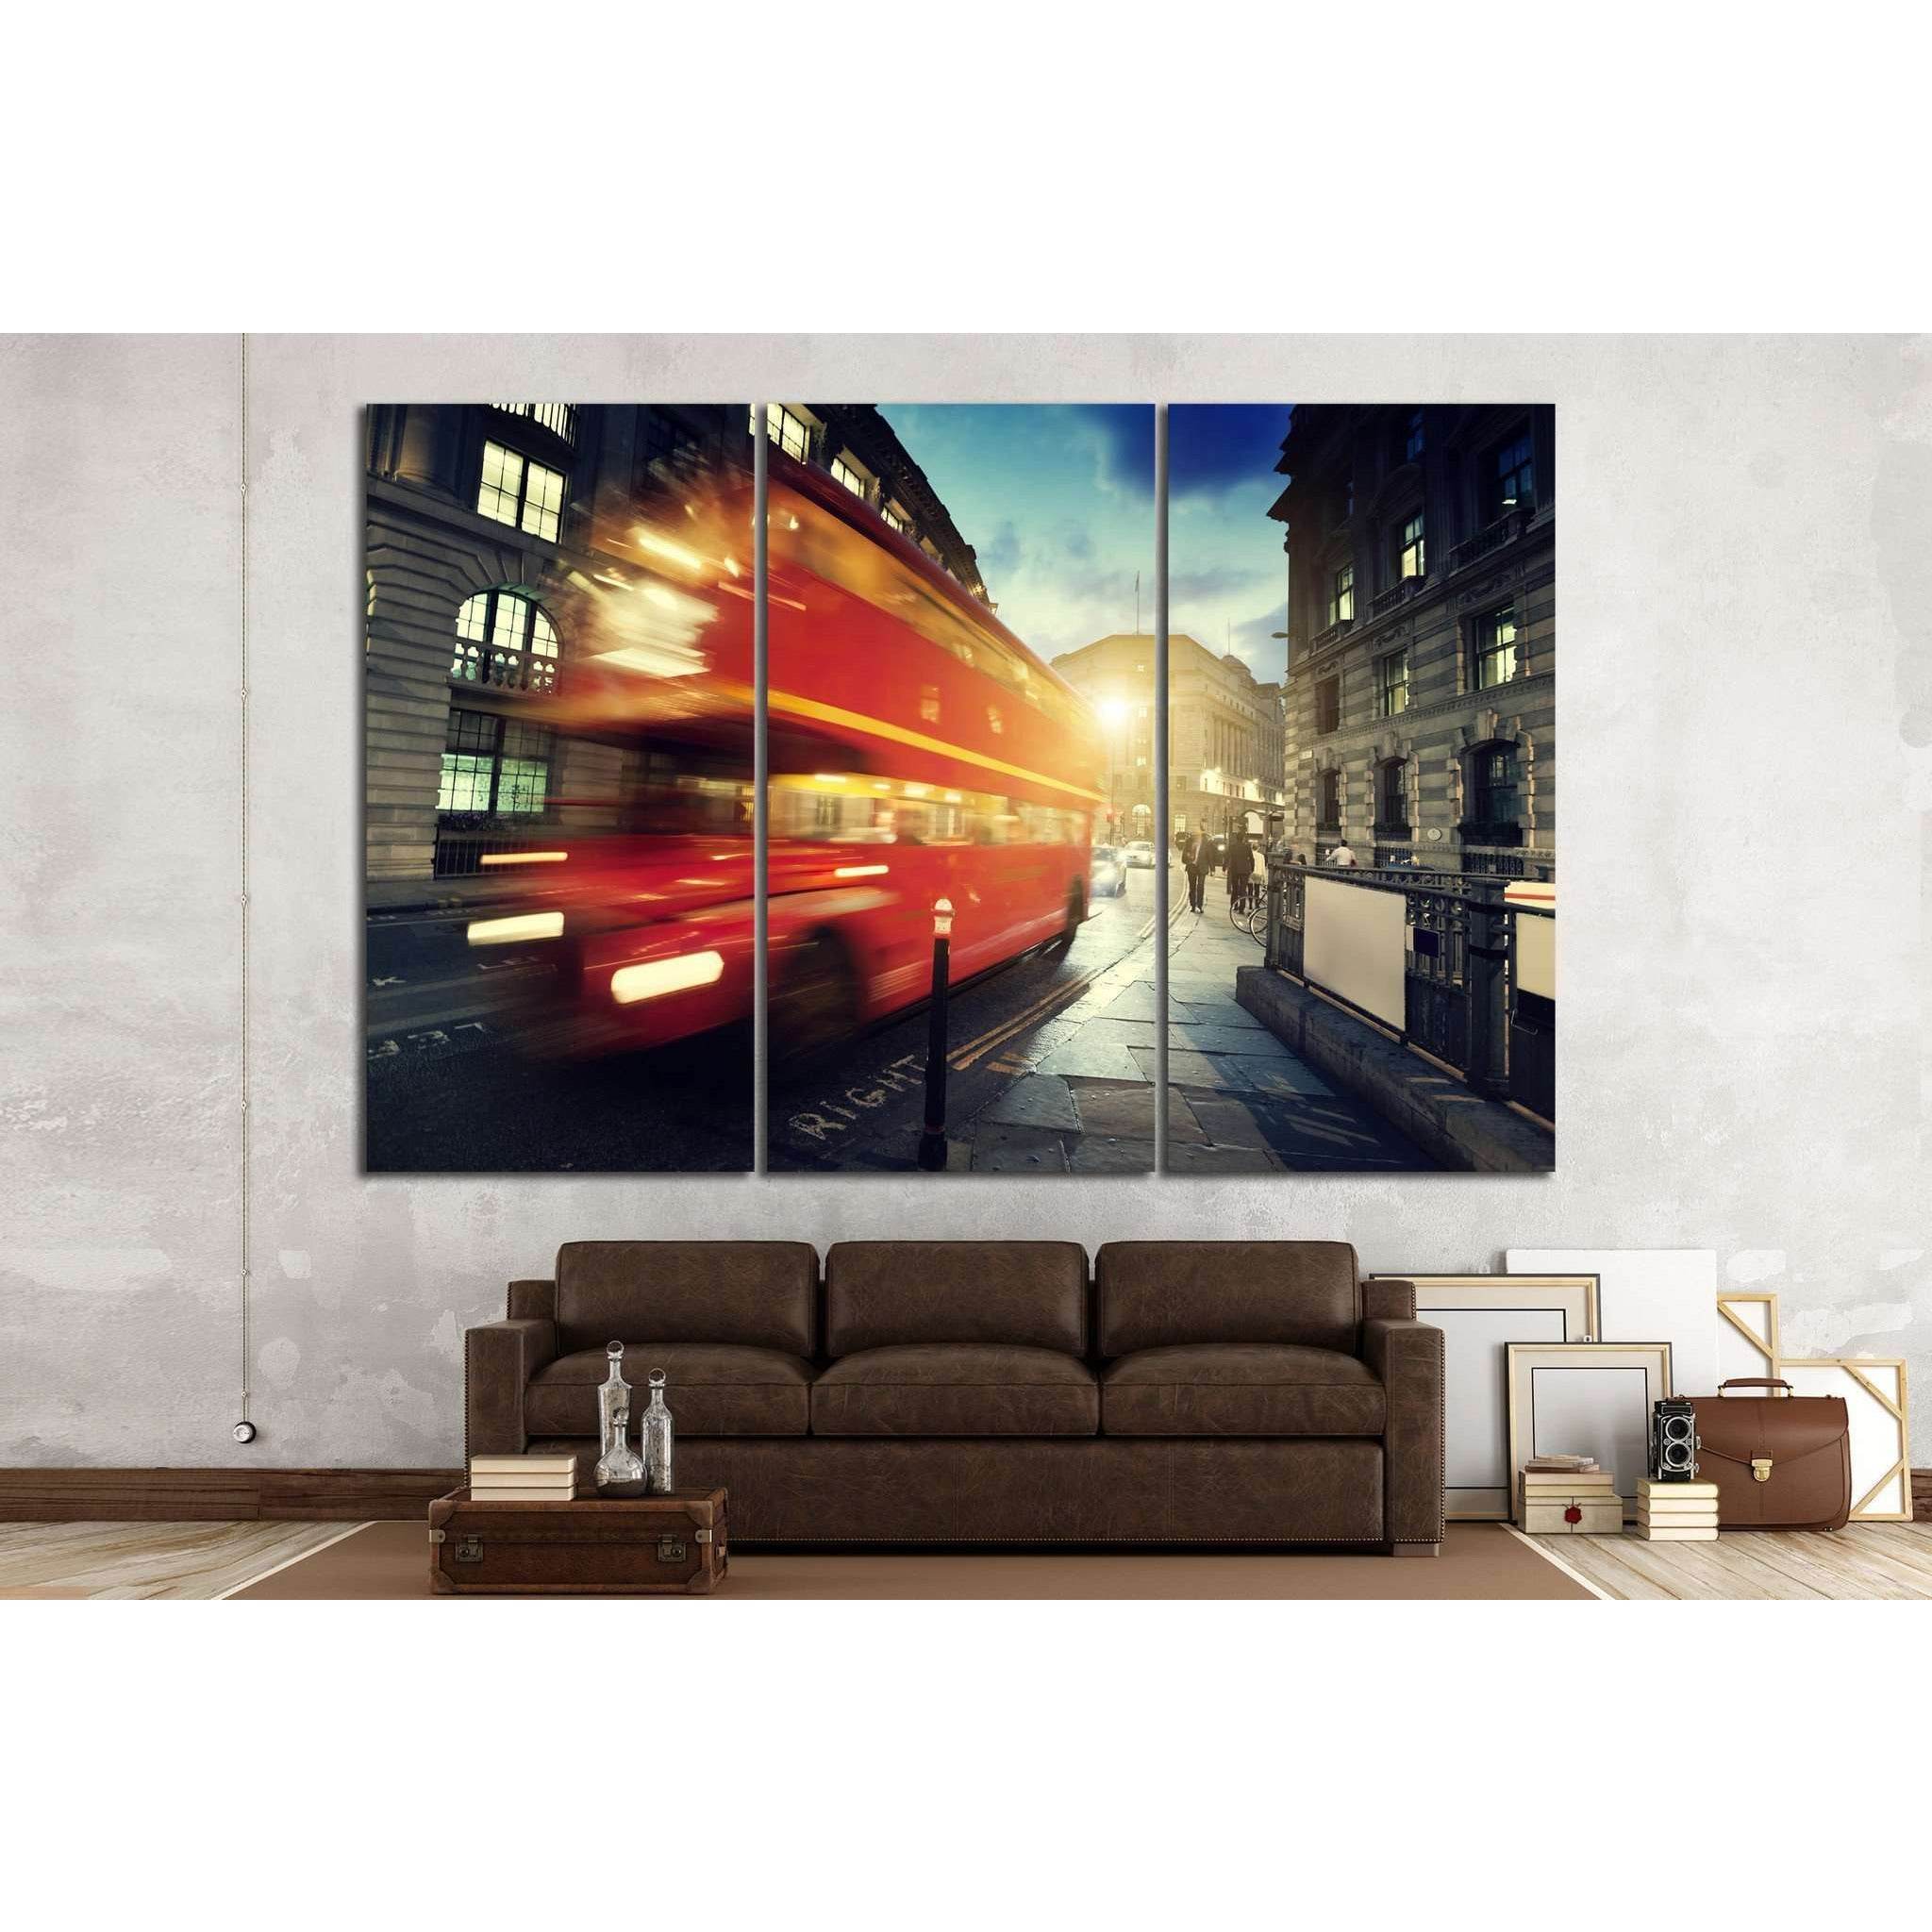 old bus on street of London №792 Ready to Hang Canvas Print